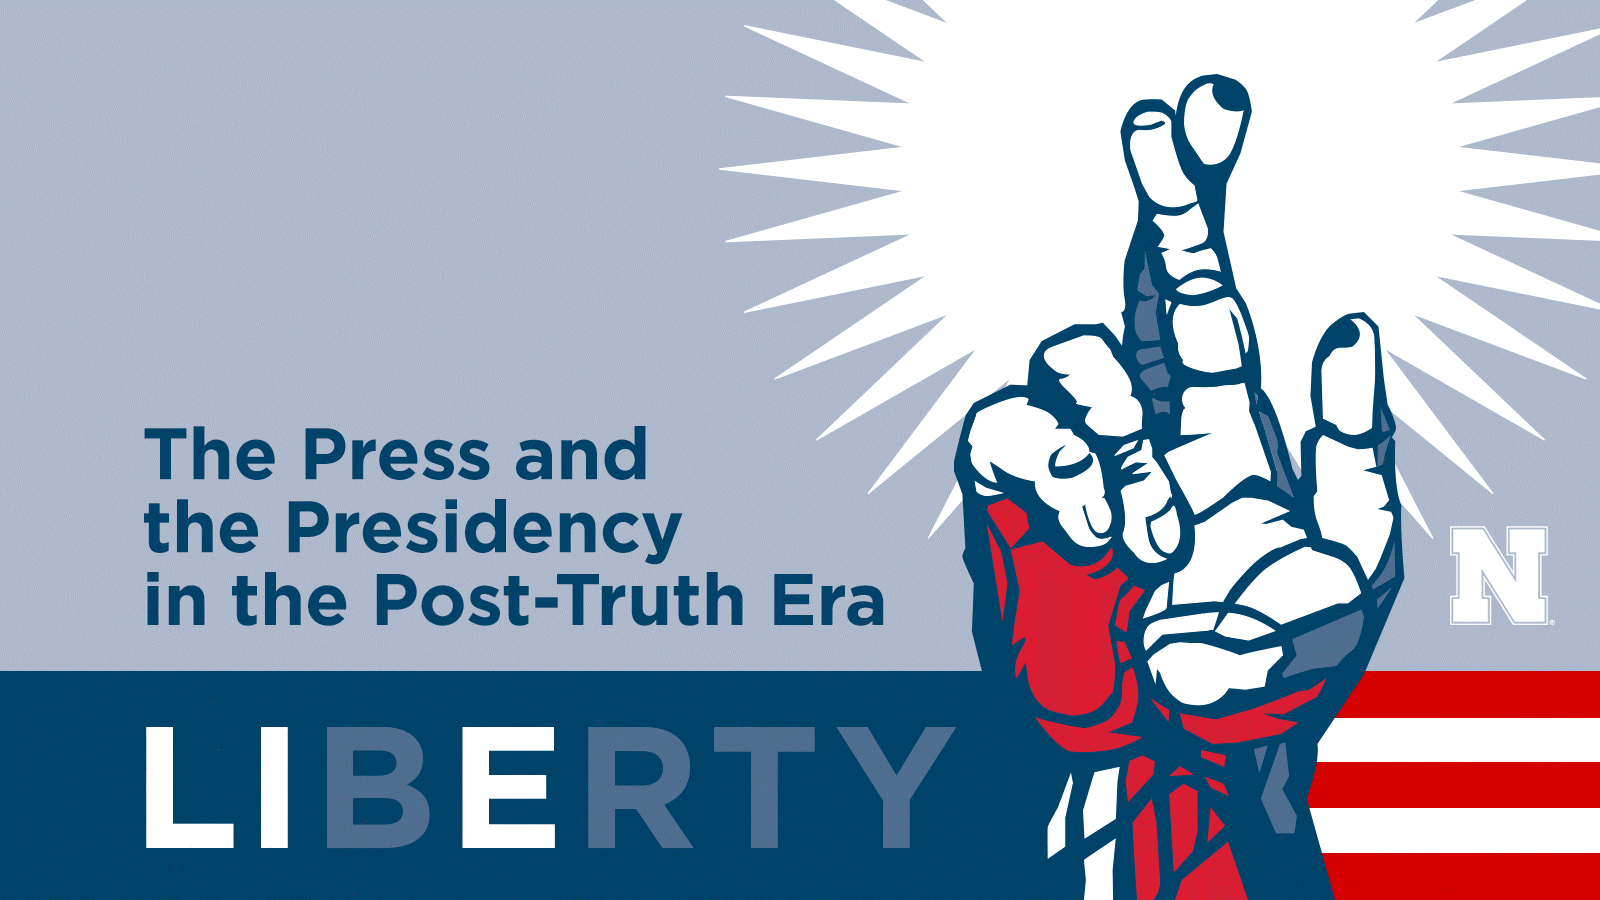 The Press and the Presidency in the Post-truth Era is the first in a series on "The Media and Politics." 